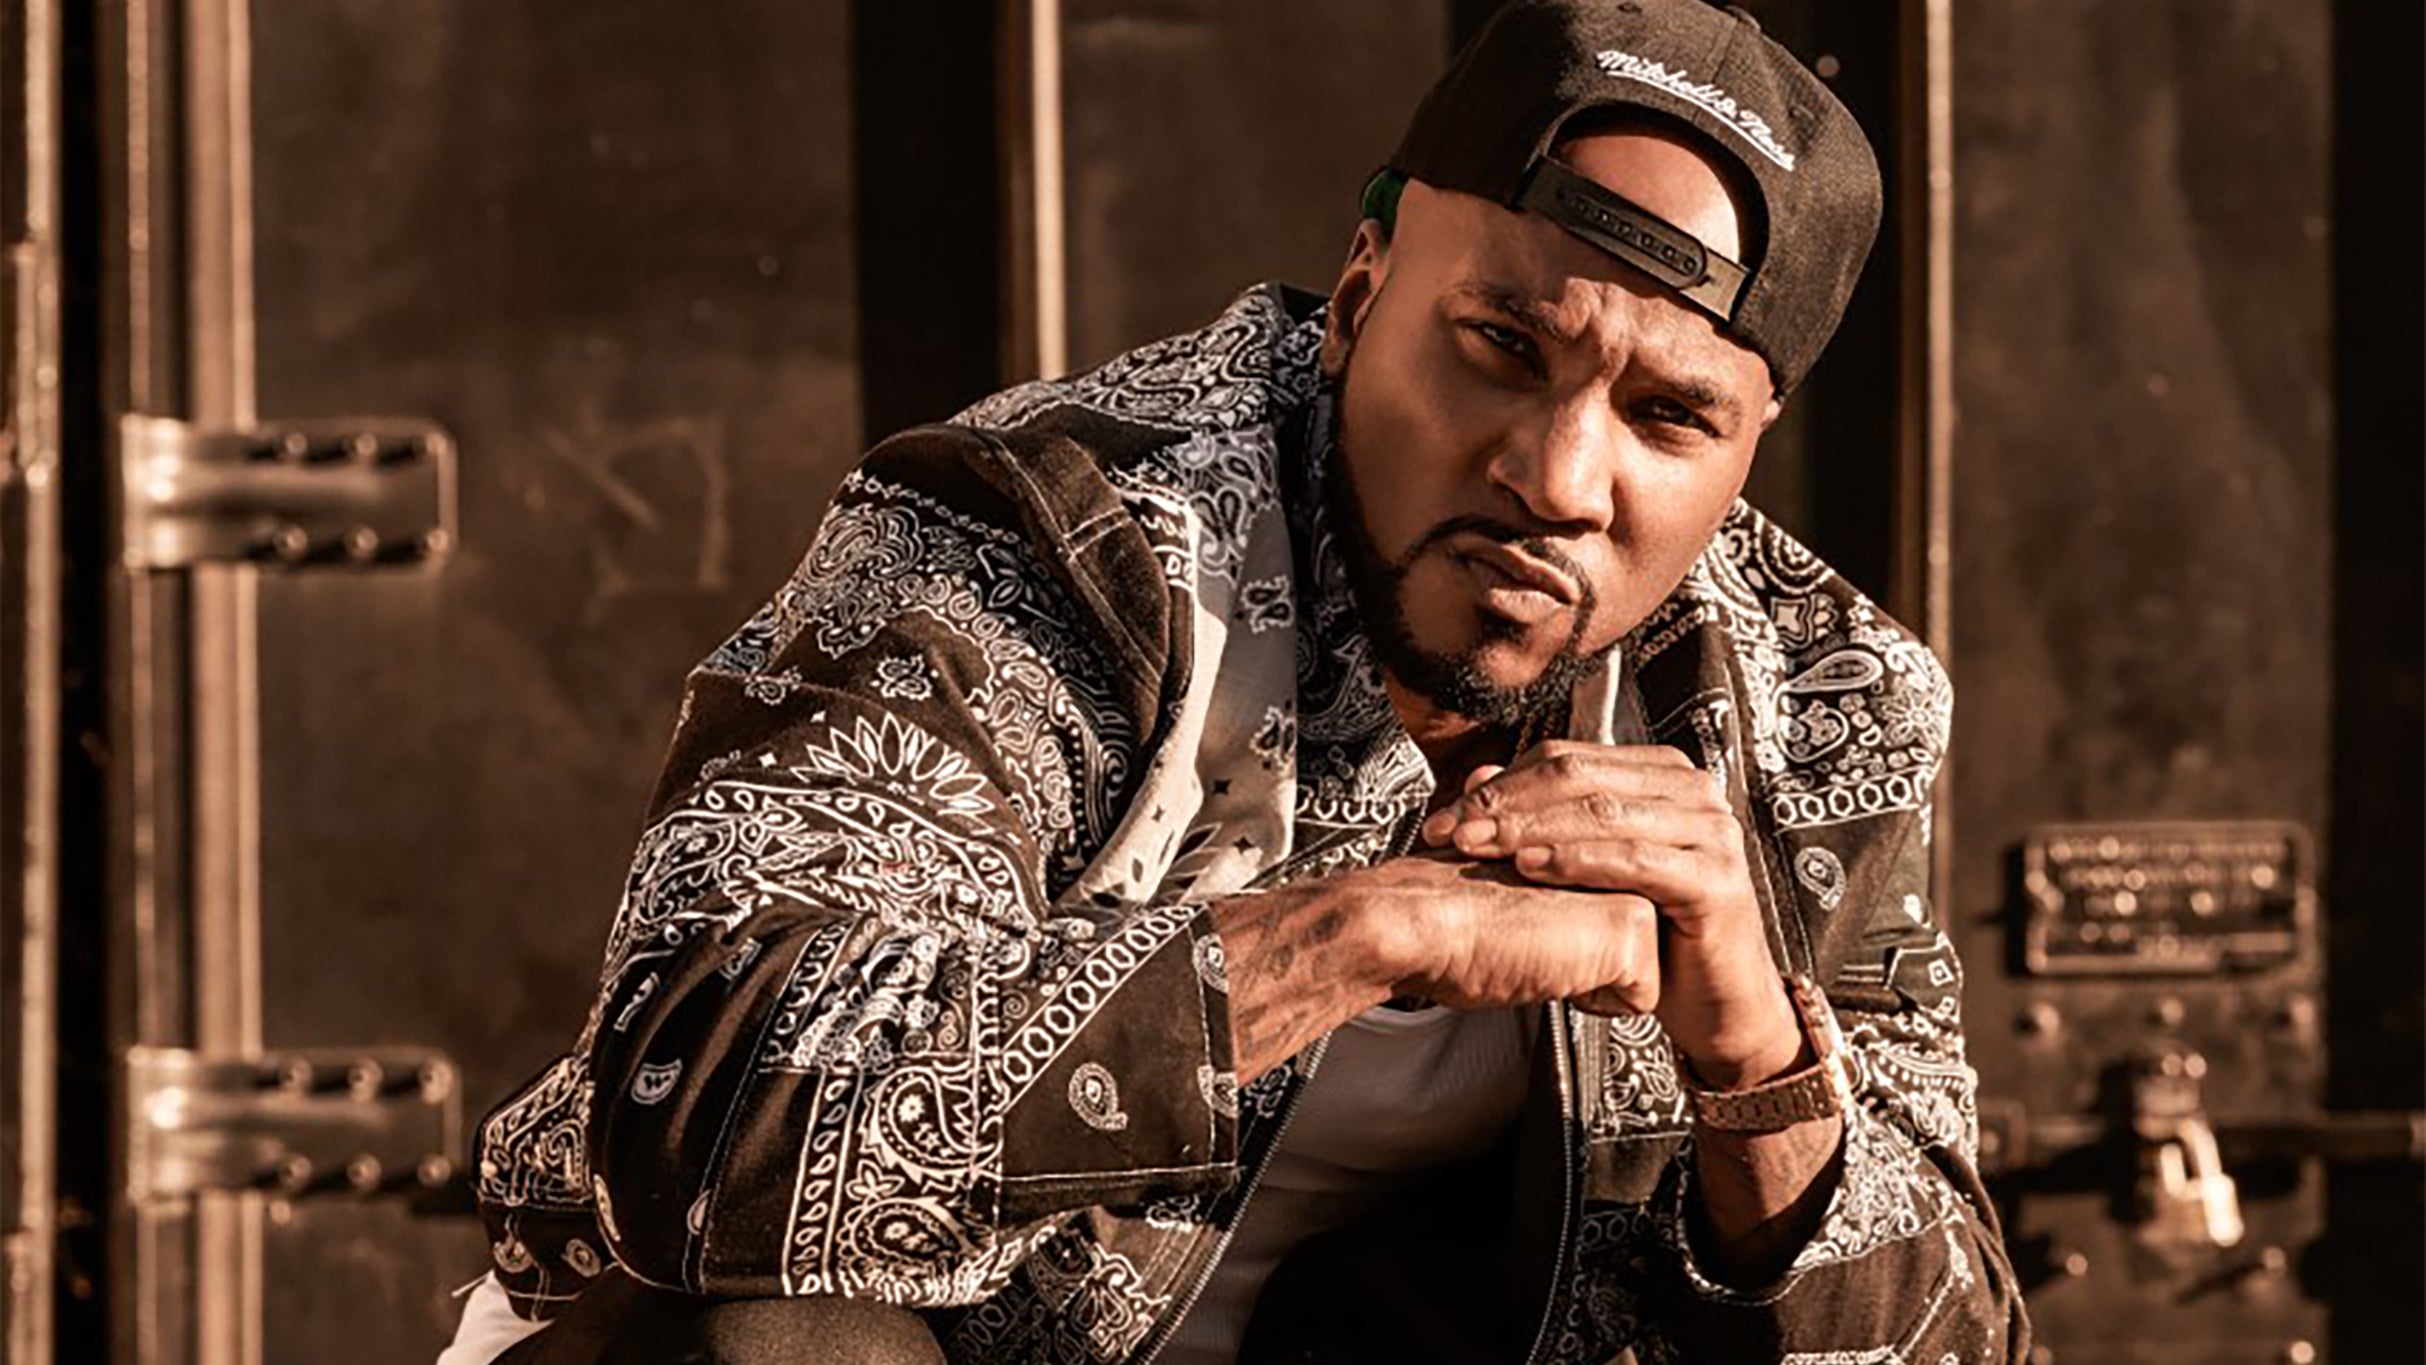 An Epic Night of Hits starring Jeezy at Bell Auditorium